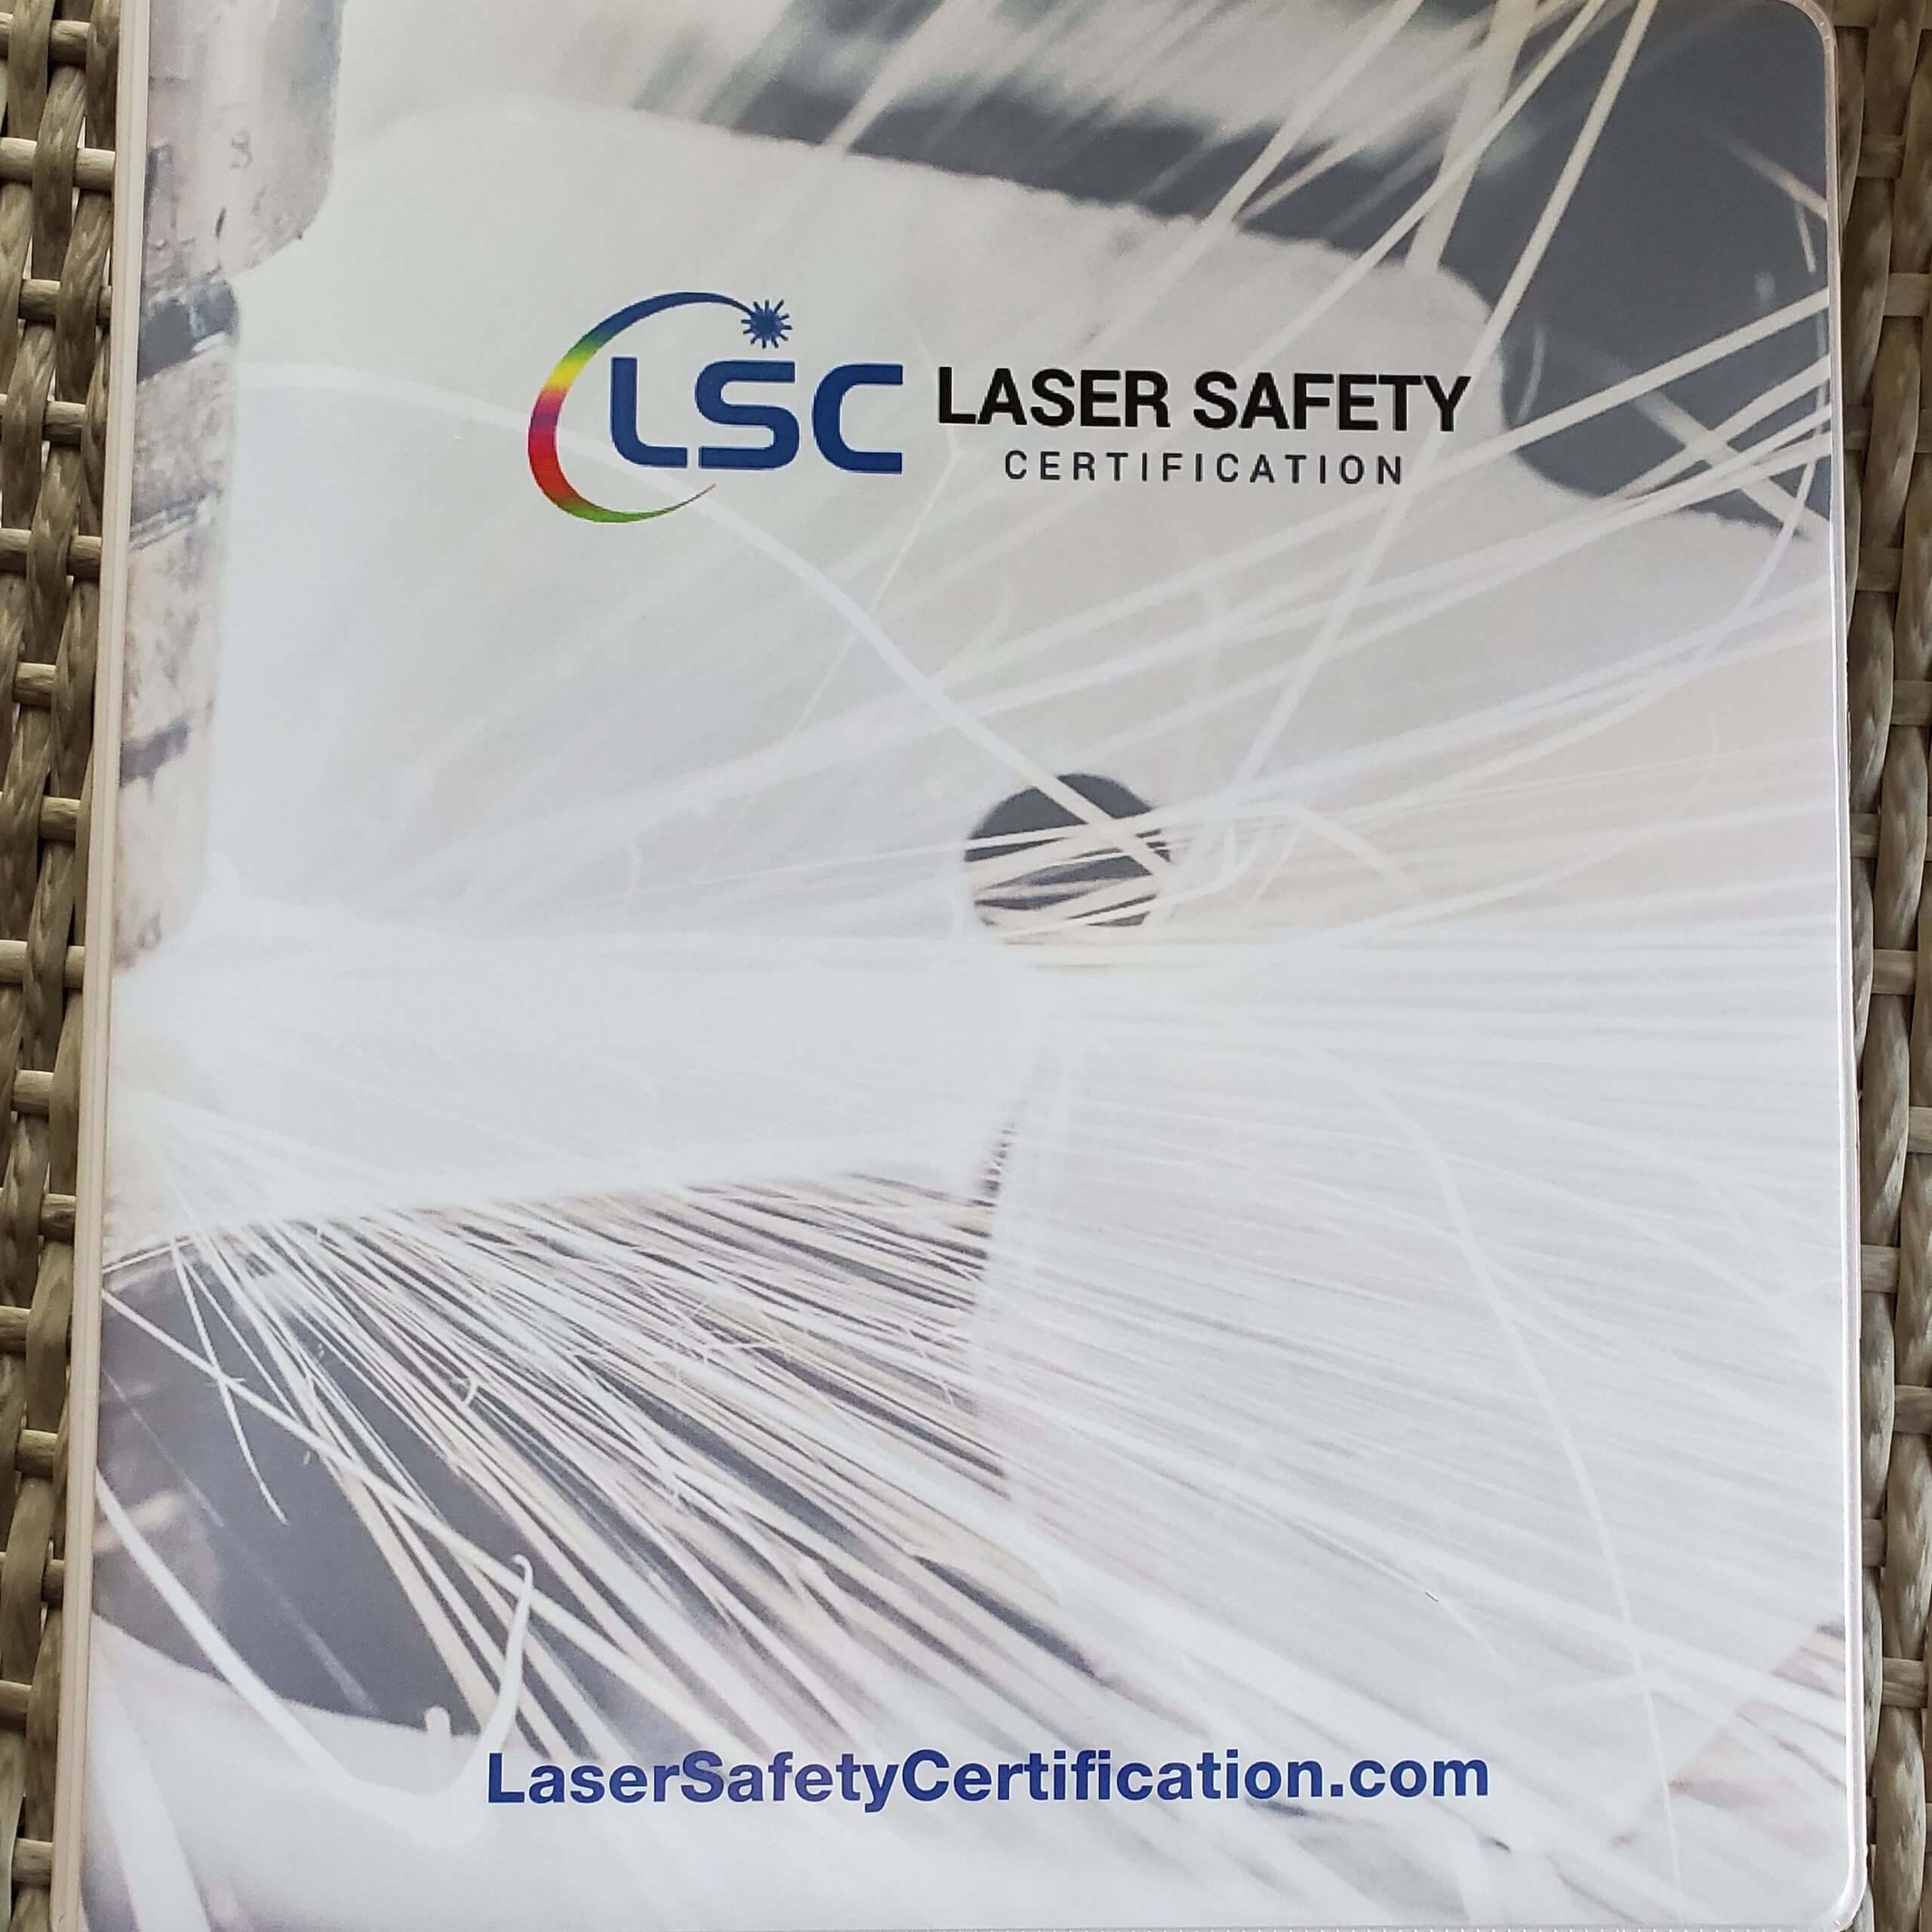 Laser safety officer certification manual on a wicker background.